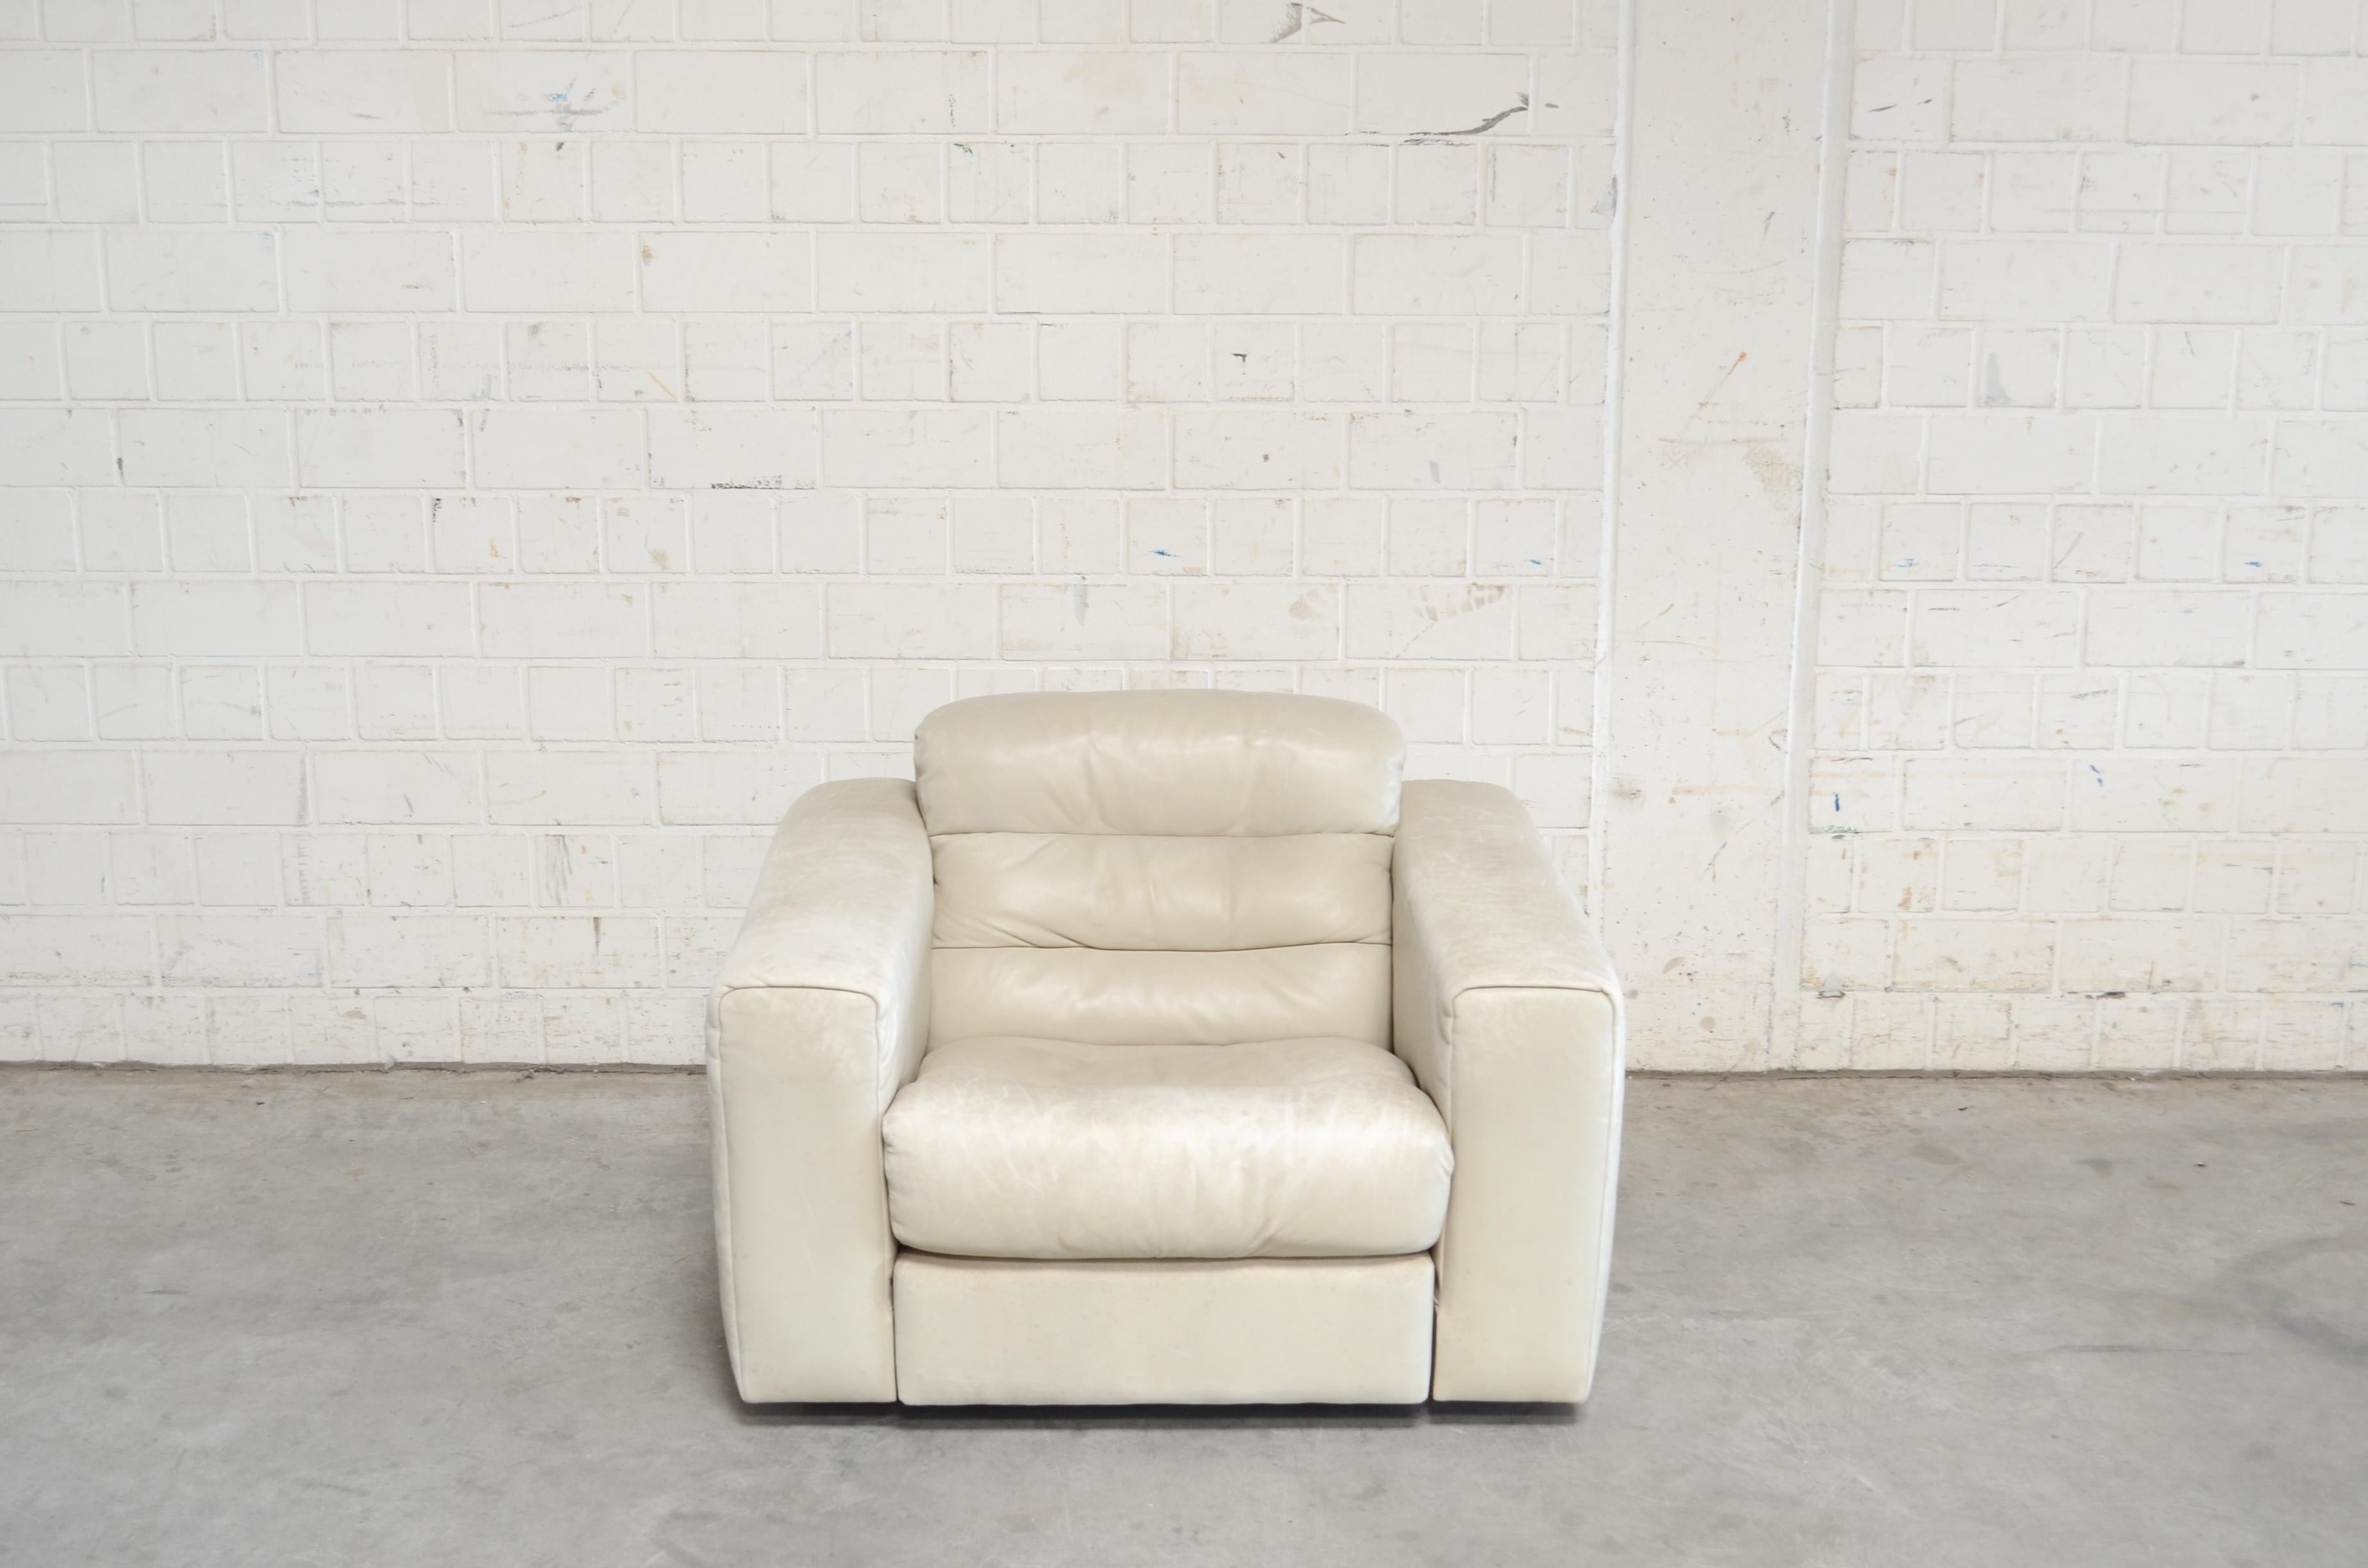 De Sede leather armchair DS 105.
Aniline leather in ecru white
Great comfort with an extendable seat for much more lounge comfort.
It’s a rare De Sede model.
Hard to find.
 
 
 
 
  